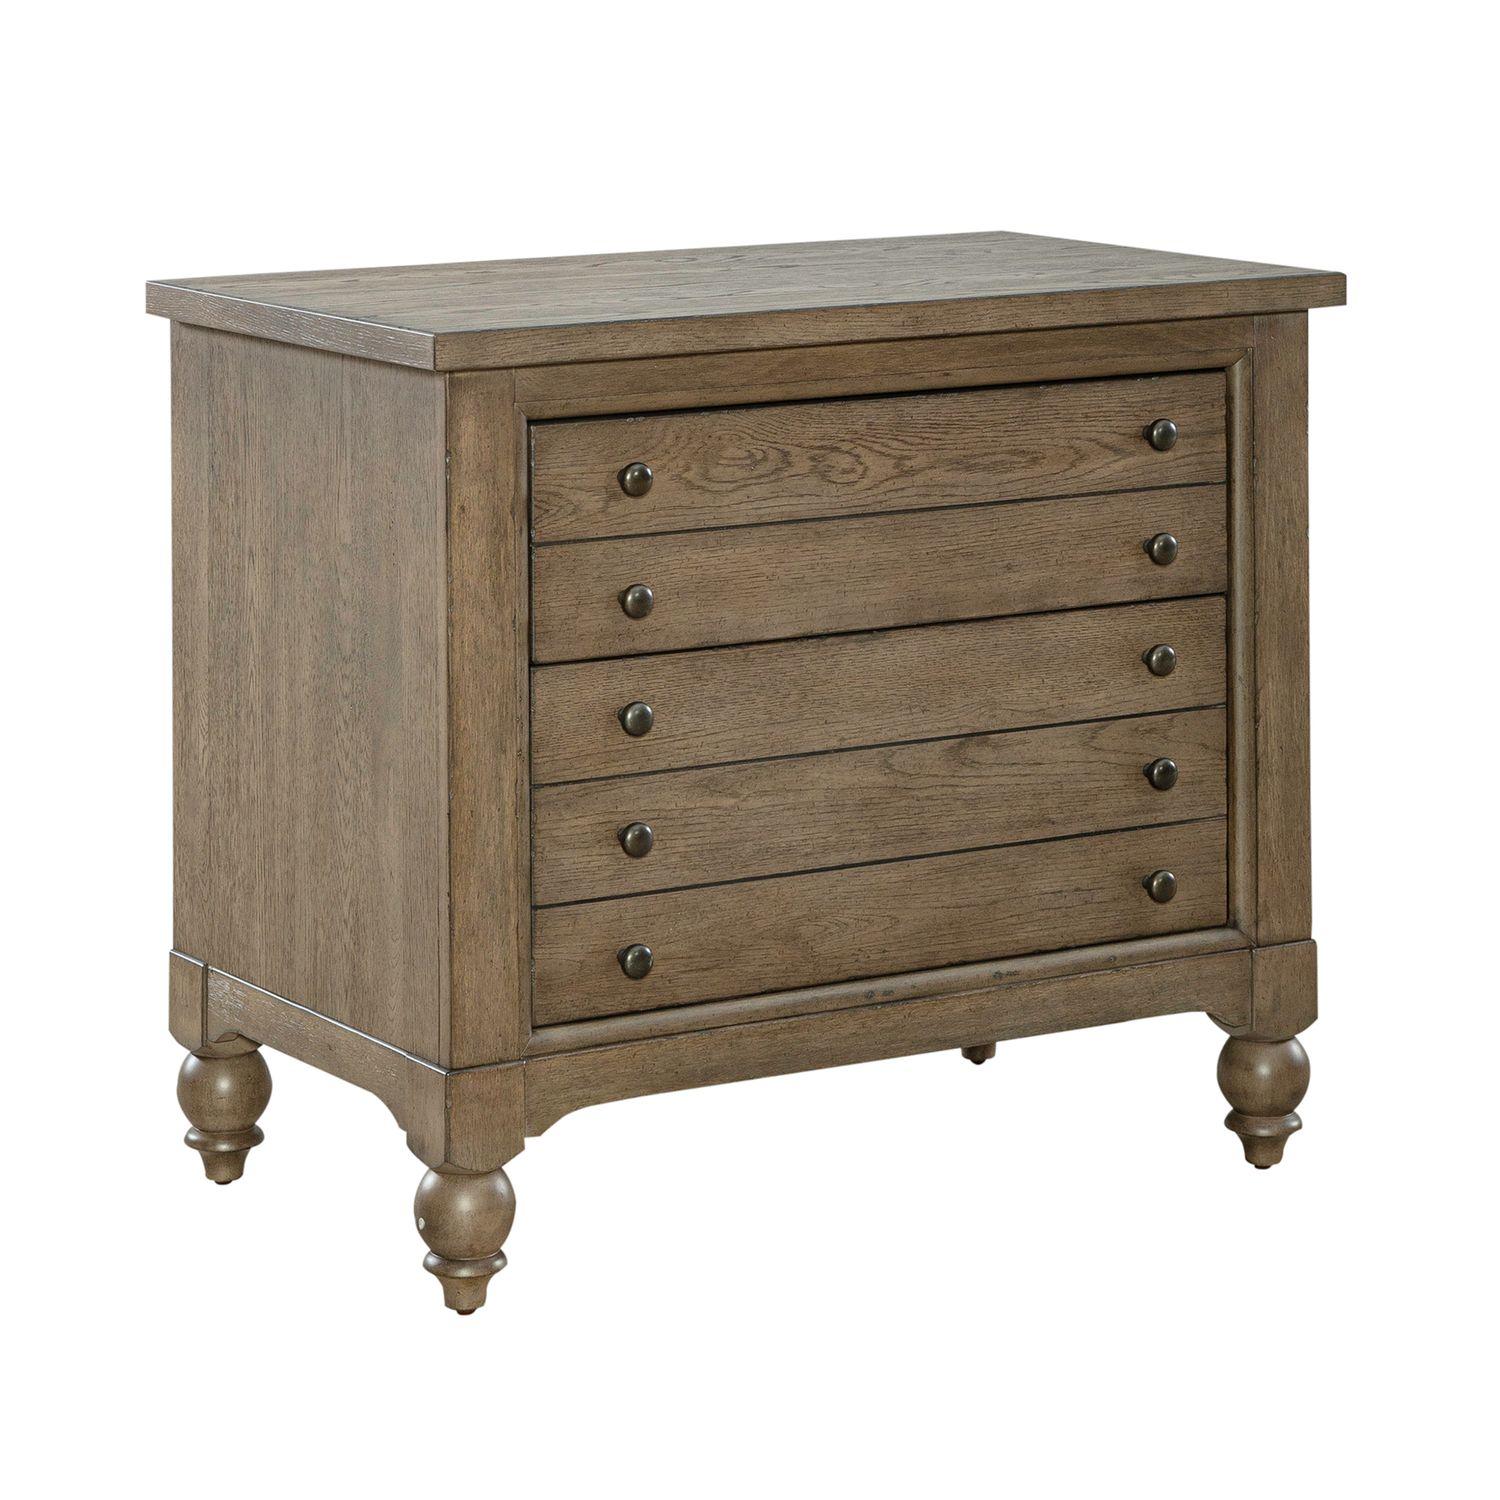 Transitional File Cabinet Americana Farmhouse (615-HO) 615-HO146 in Taupe 